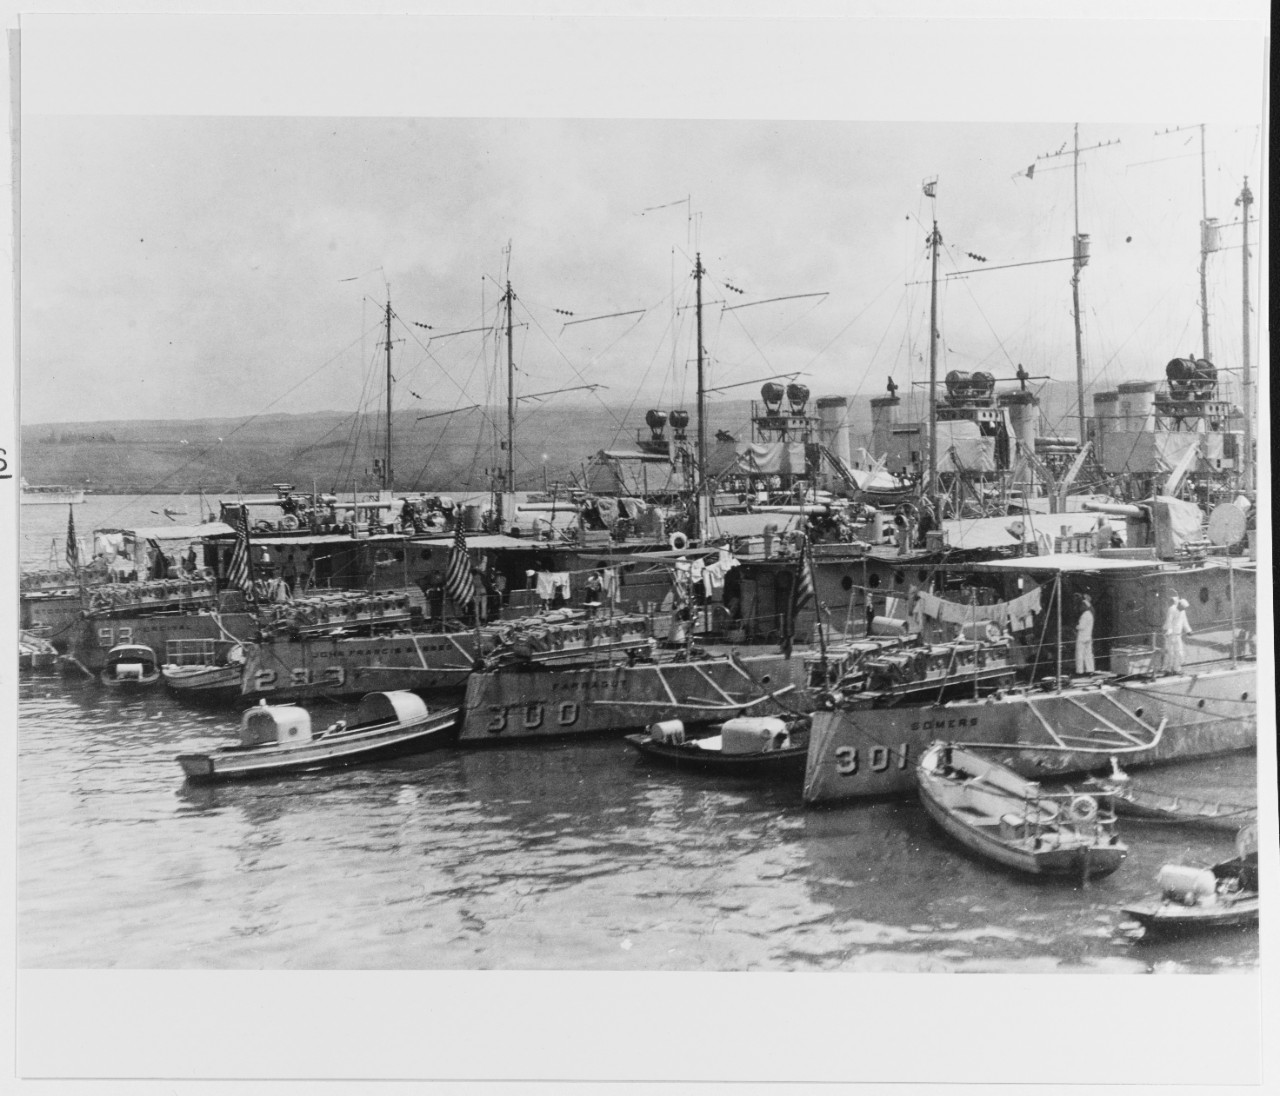 Photo #: NH 82564  Destroyers moored together at Pearl Harbor, Hawaii, circa 1925